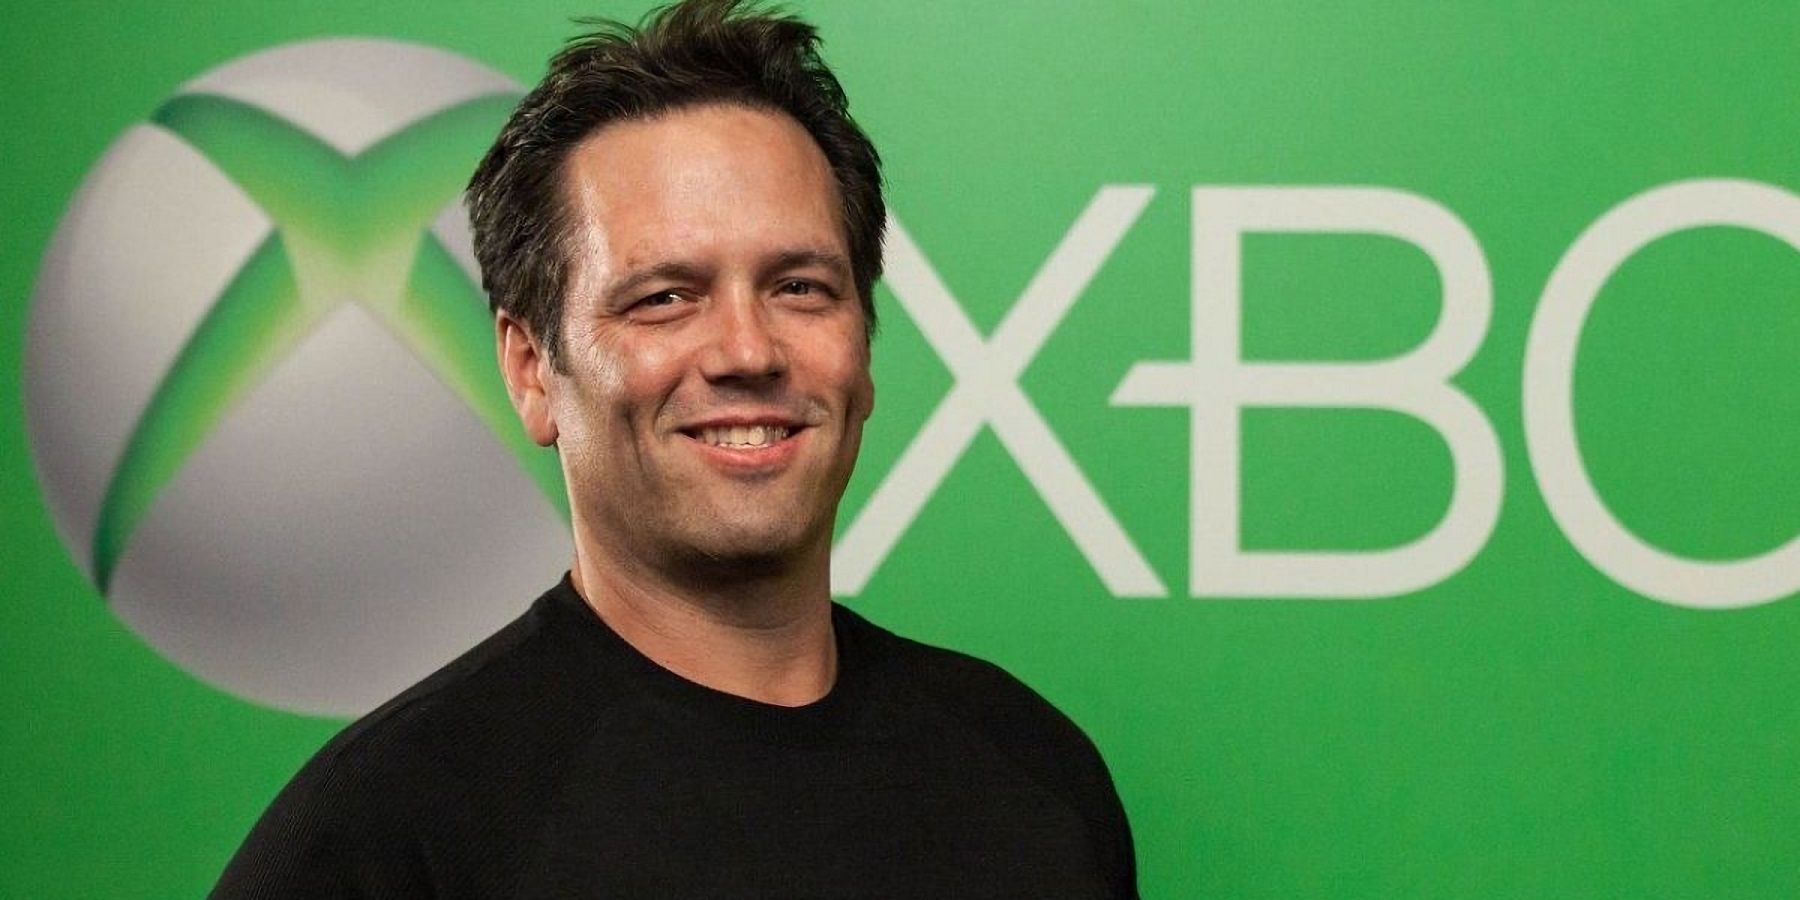 Xbox CEO Says Gaming Industry is 'Resilient' to Economic
Uncertainty